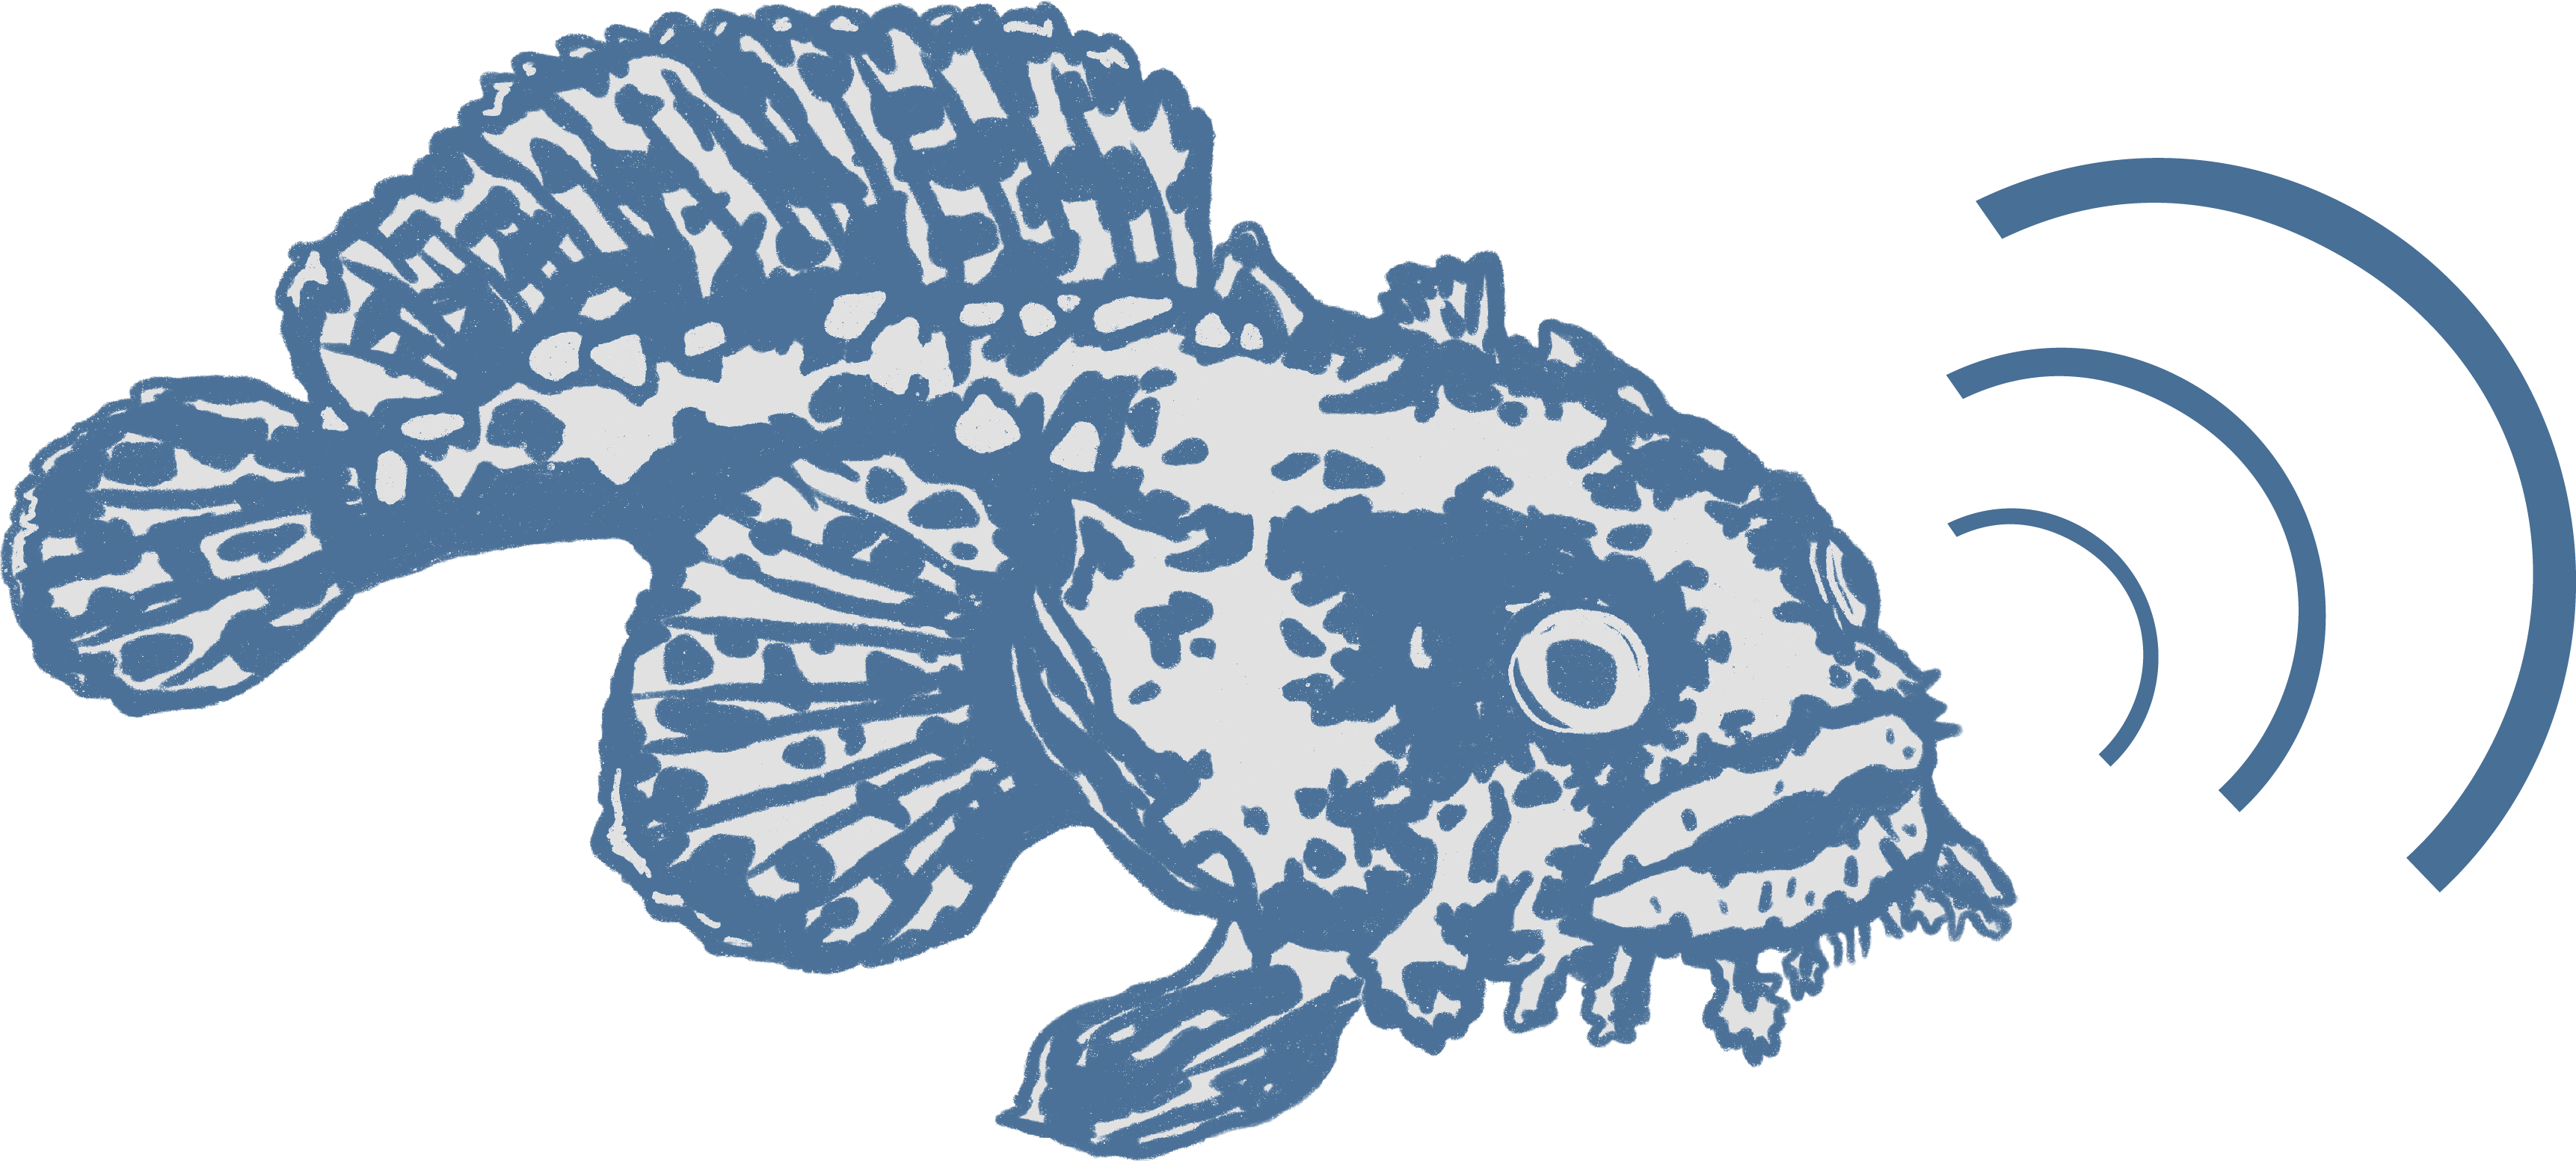 Fish Sounds logo - links to index